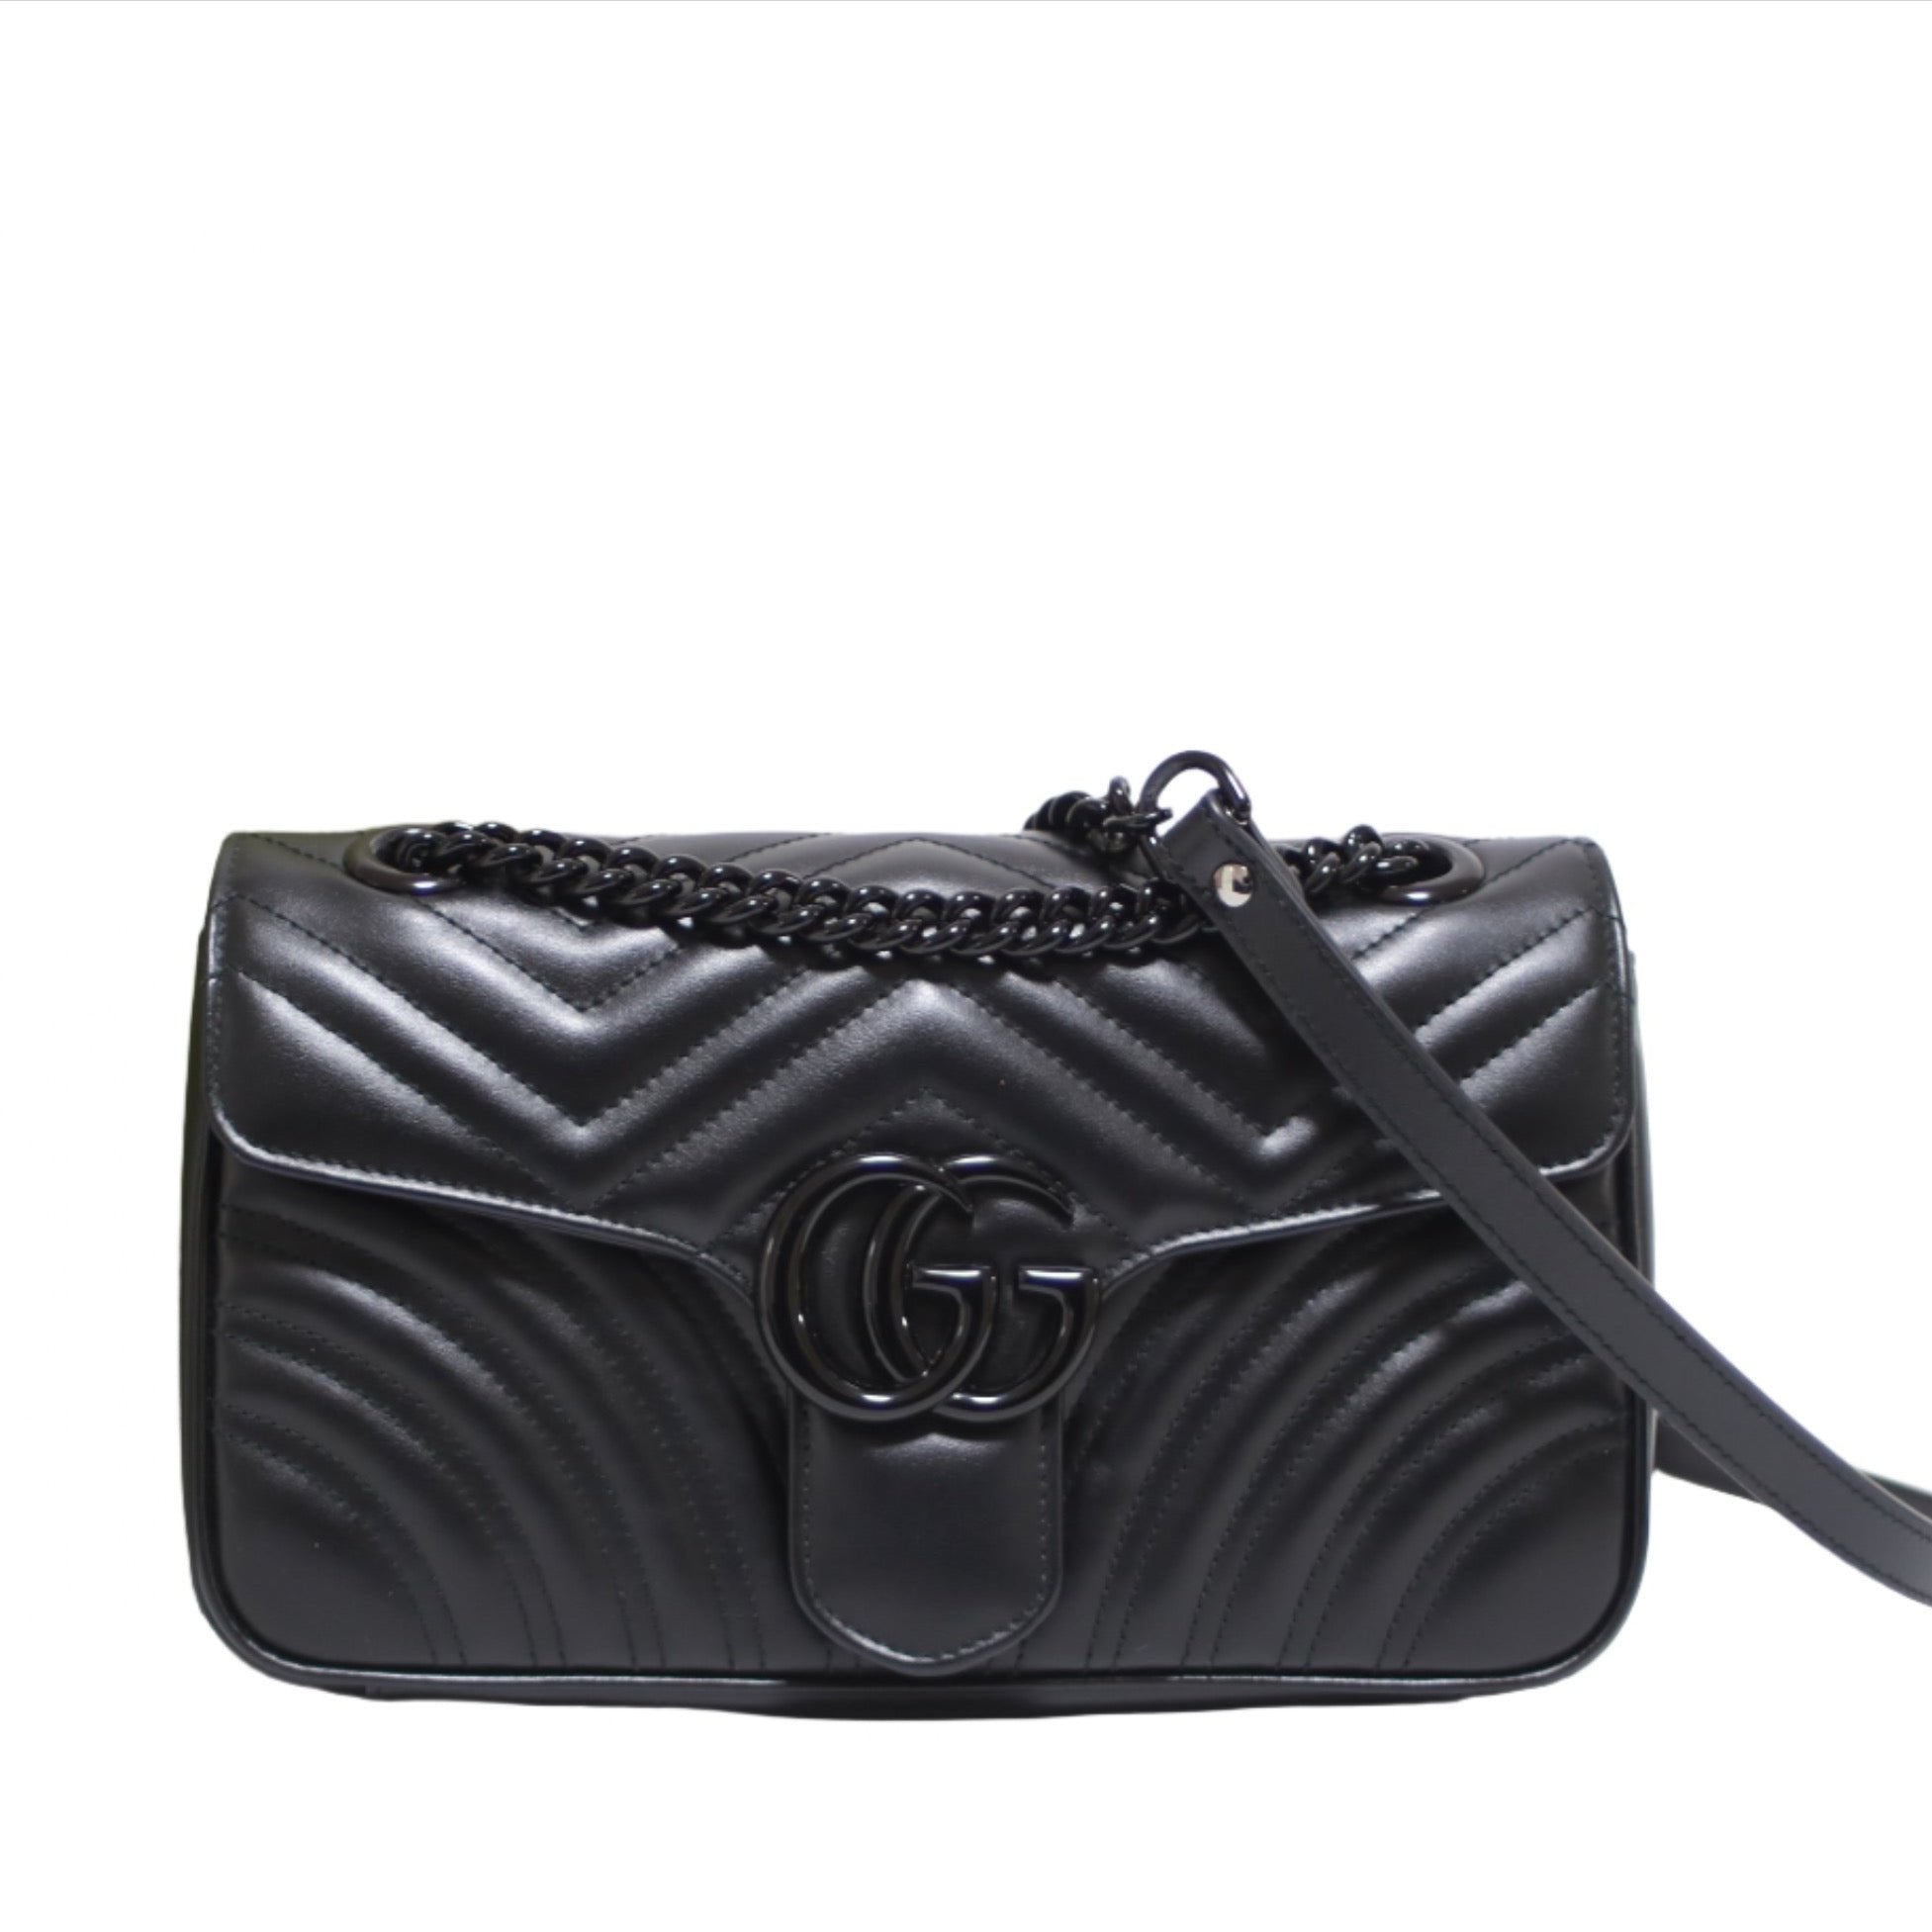 Gucci Marmont Small Shoulder Bag Used (7969)